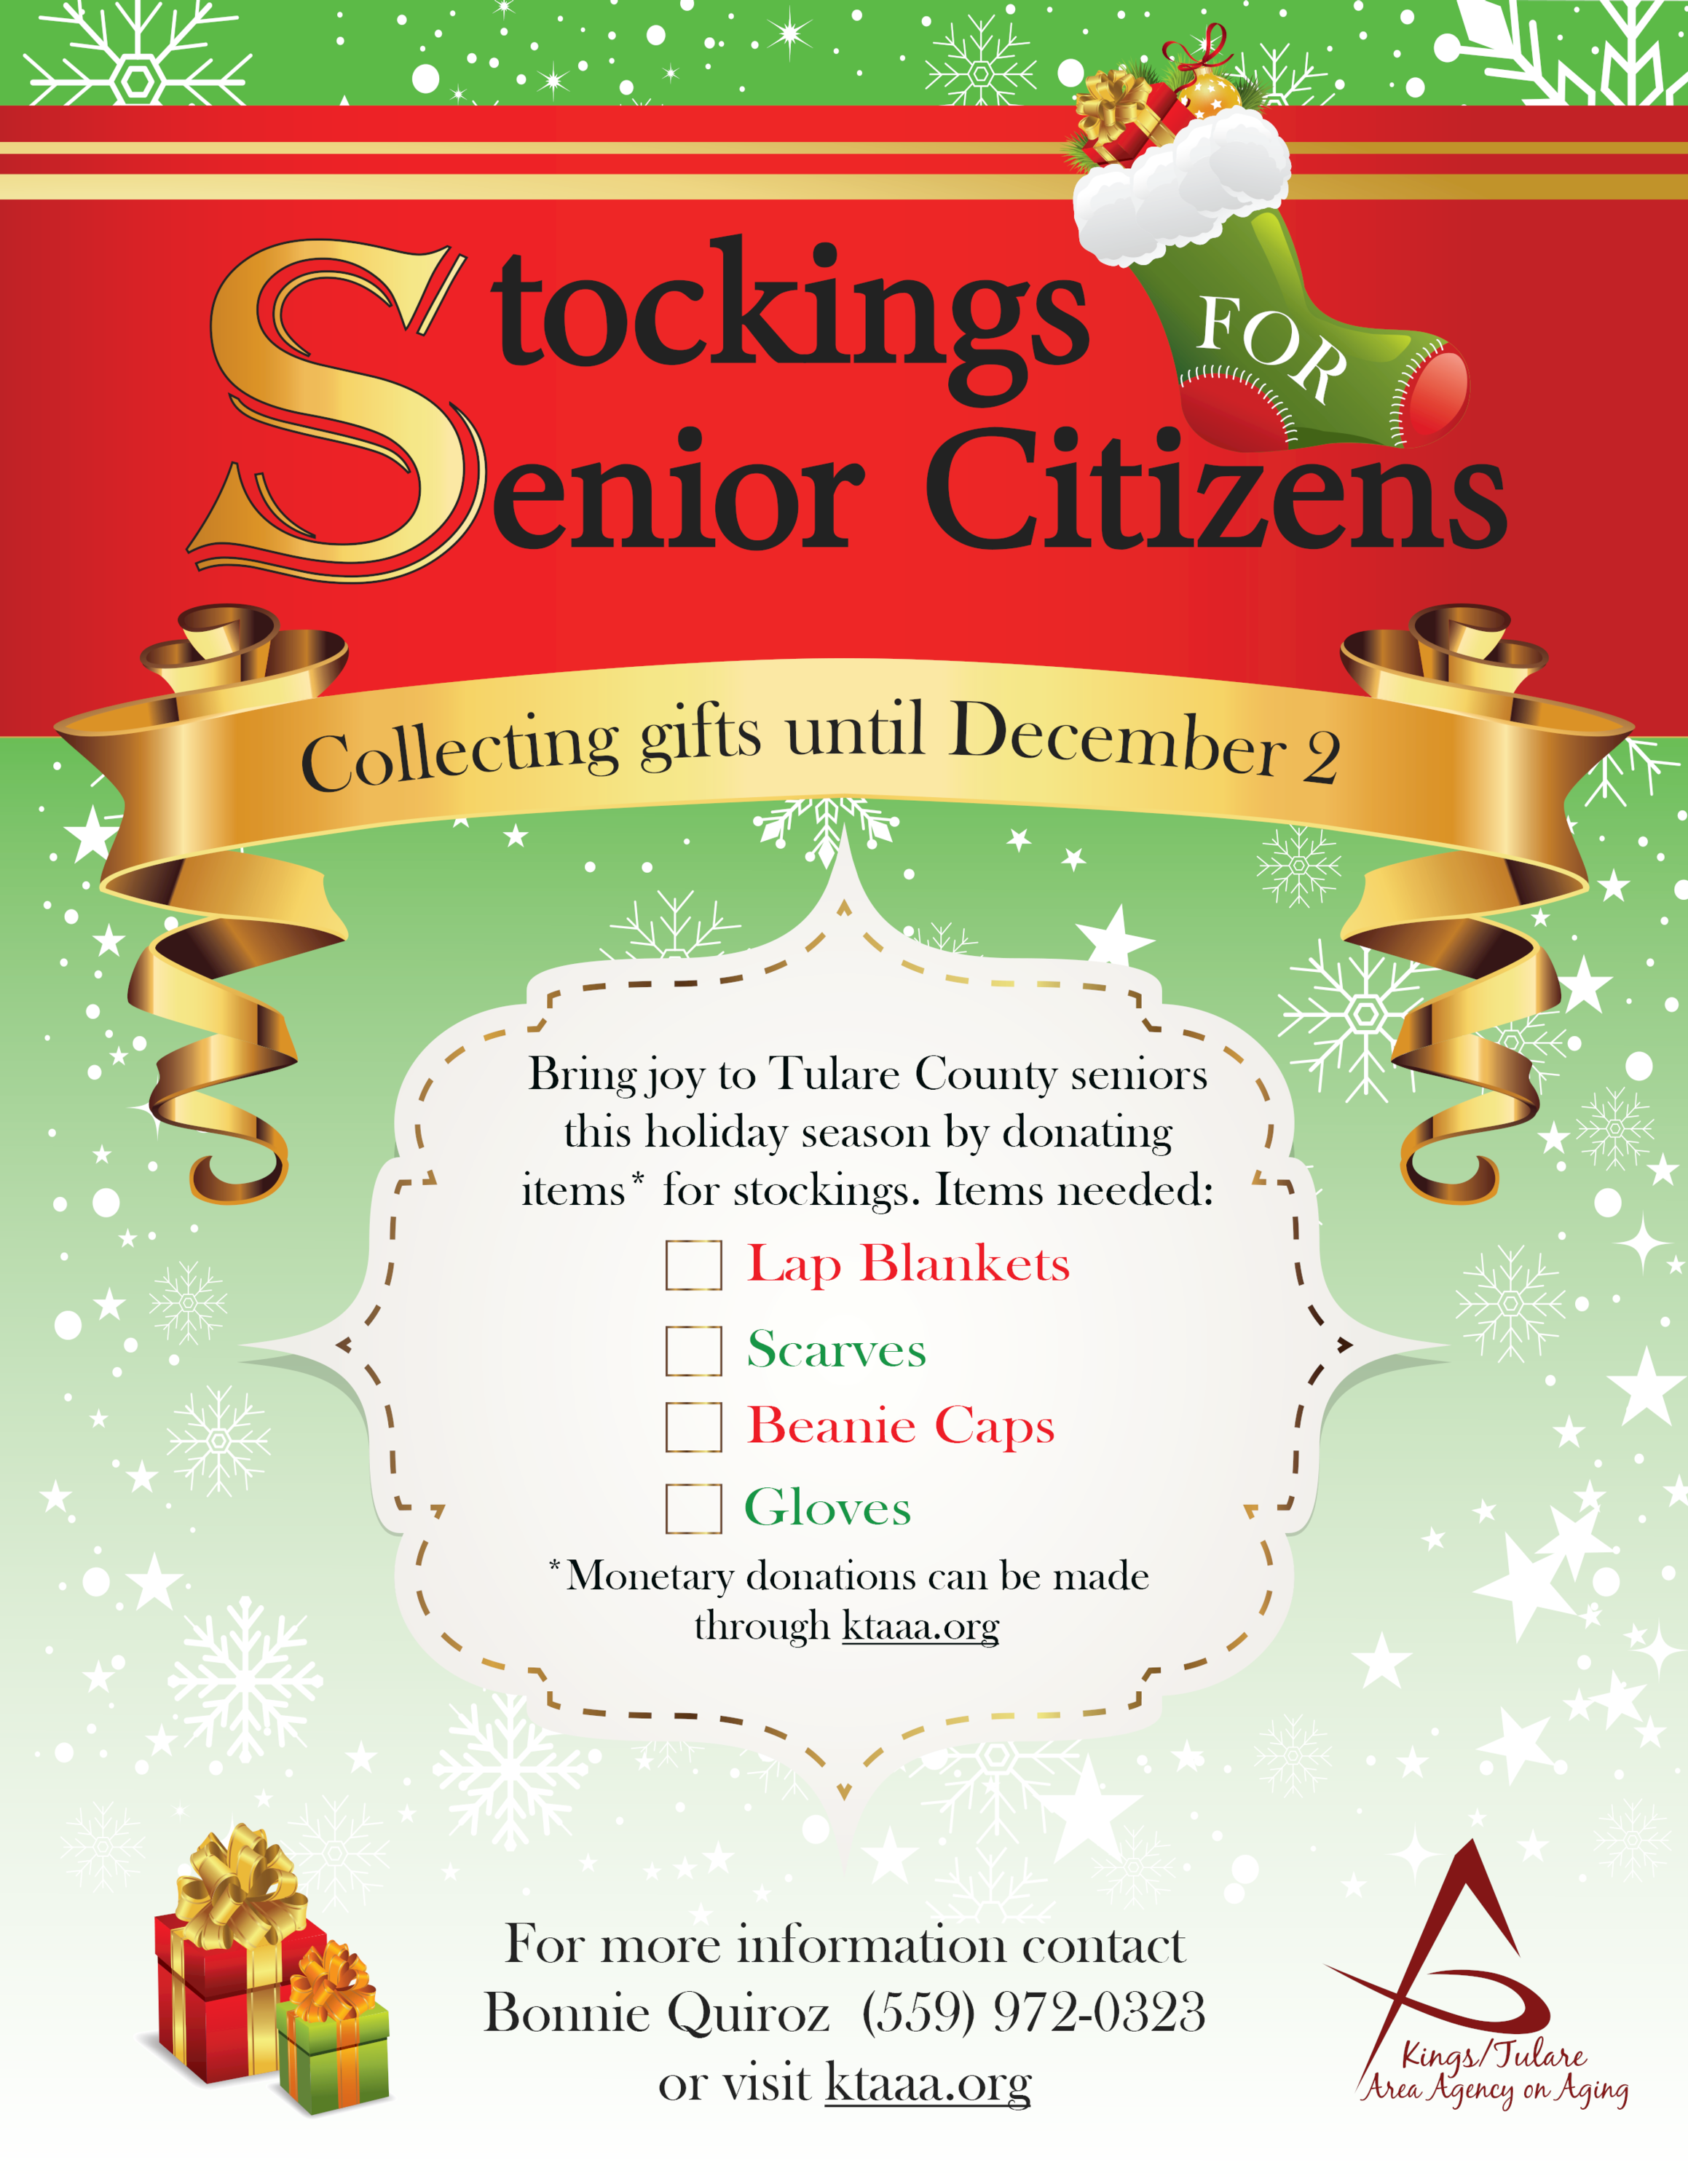 Annual Stockings for Seniors Collection Drive Starts October 14 - Friends  of Tulare County